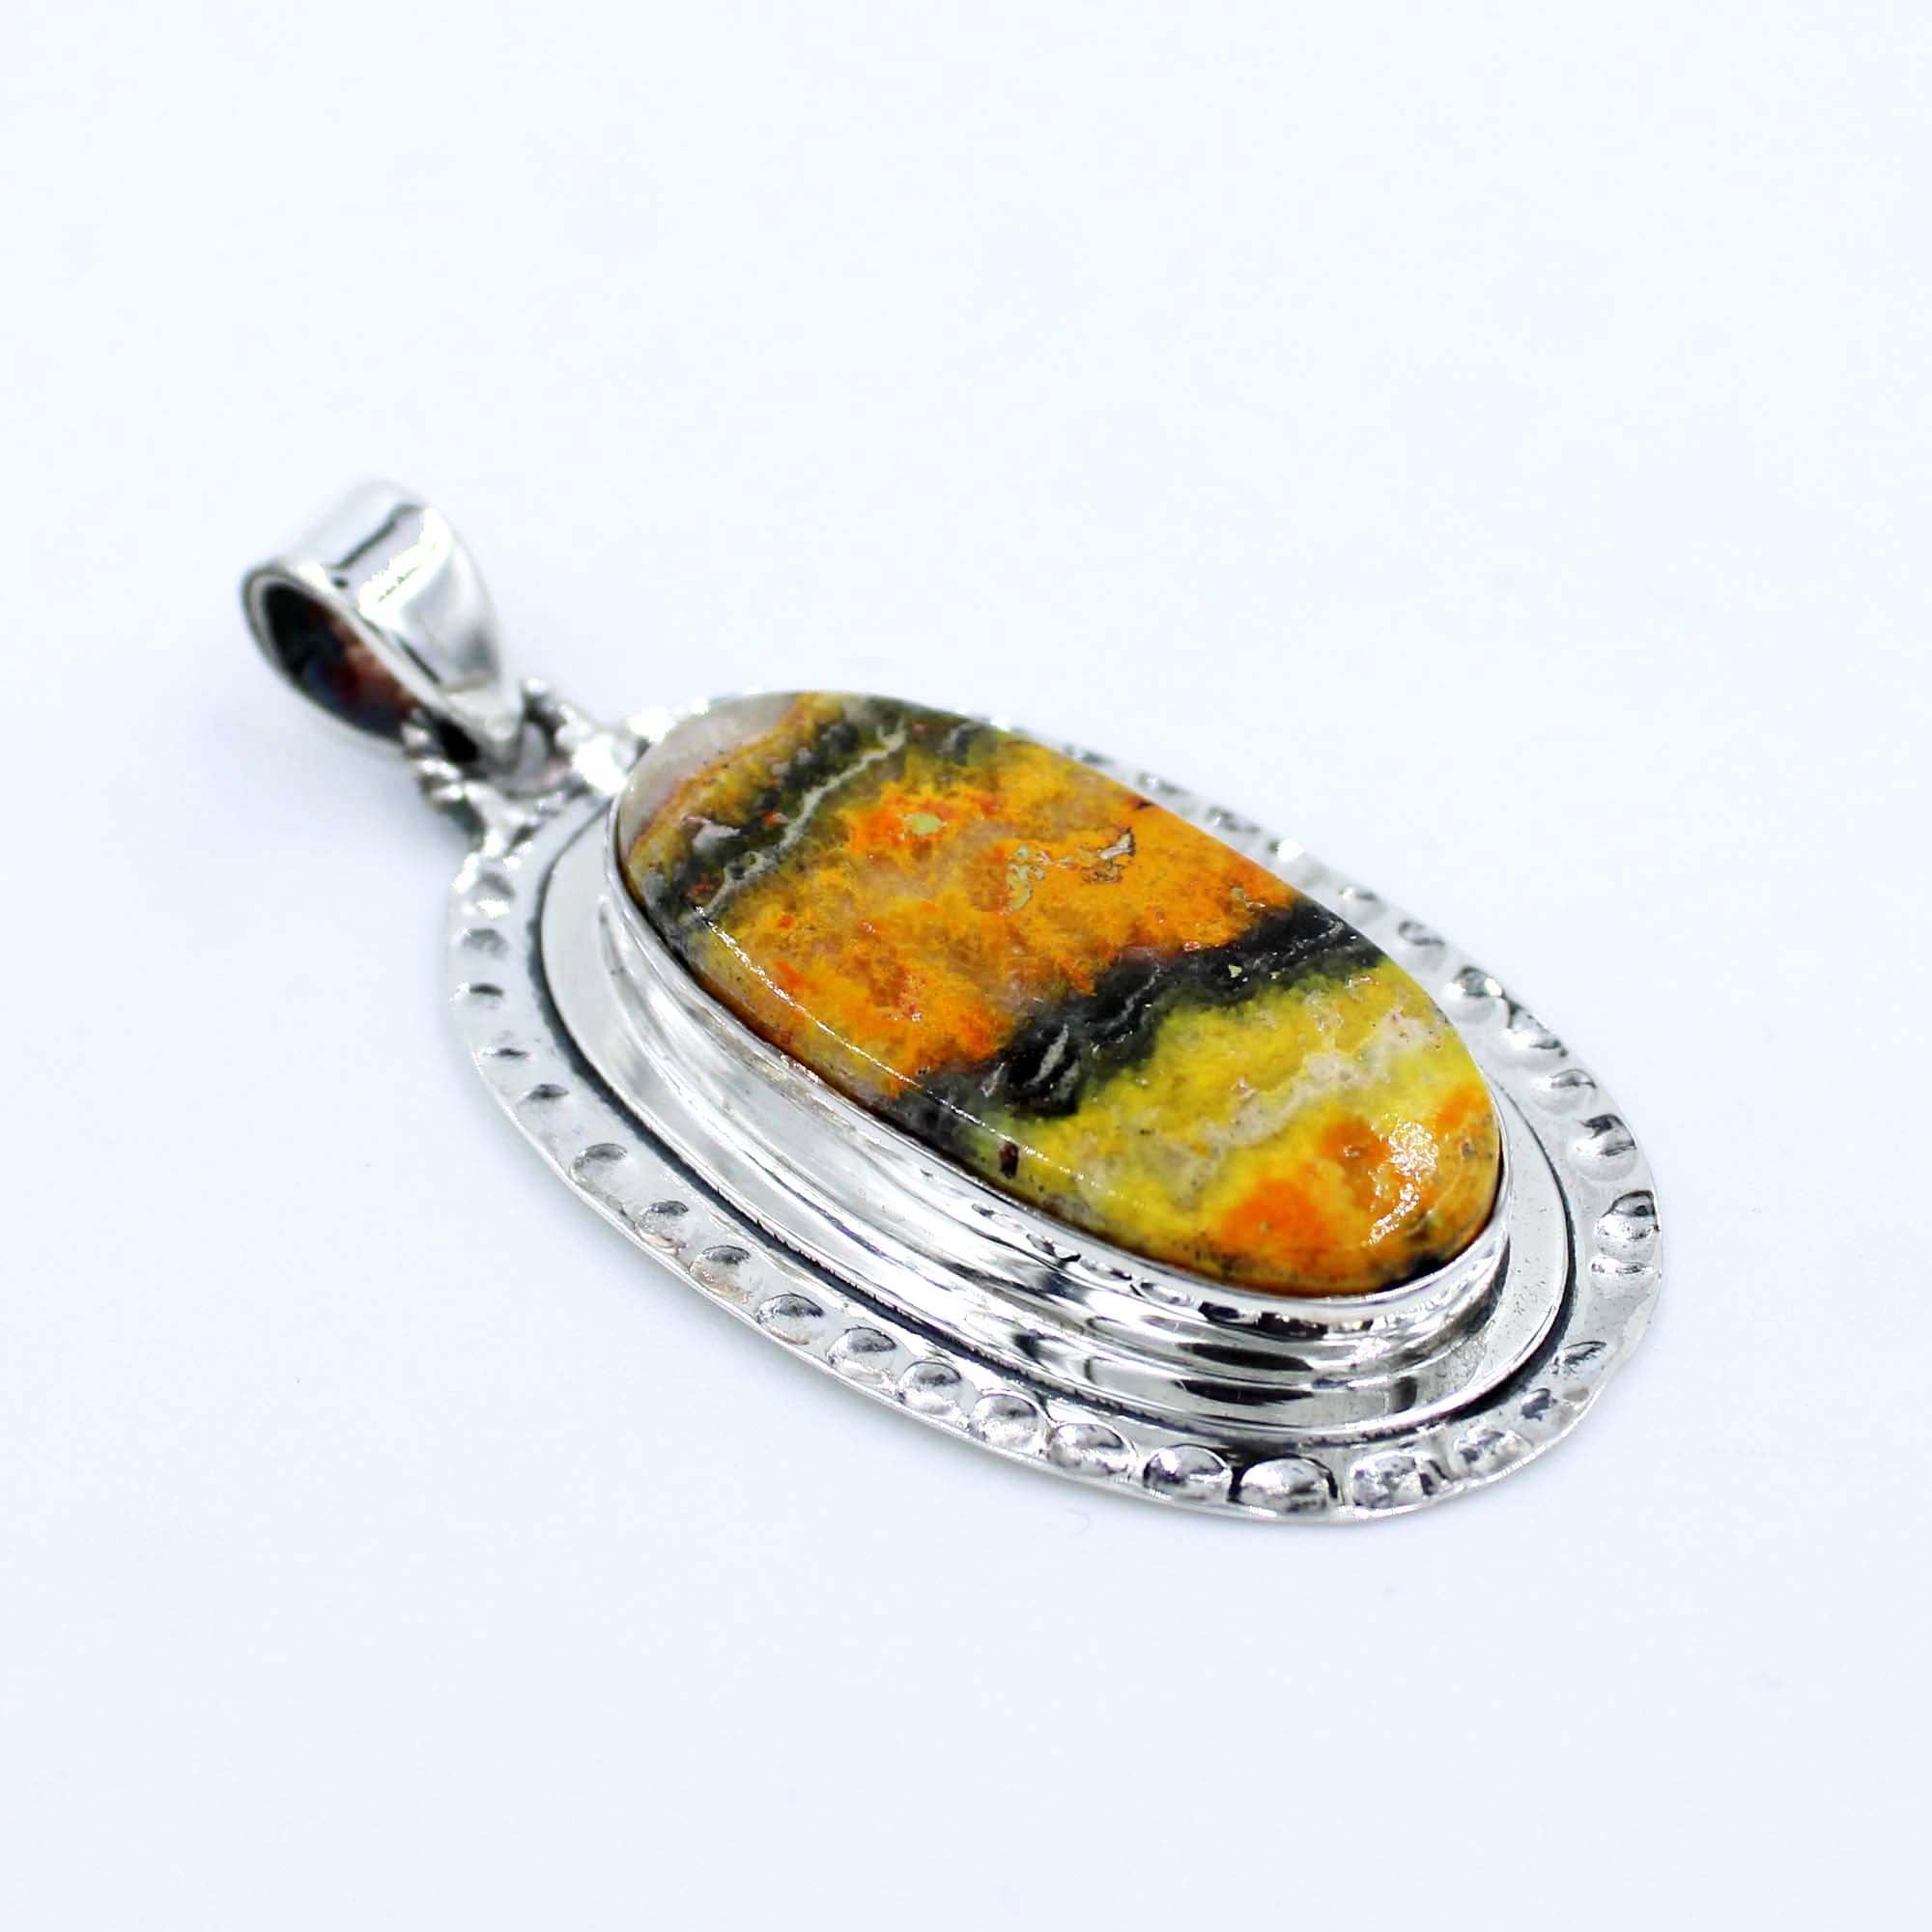 Bumble Bee Jasper Sterling Silver Textured Pendant